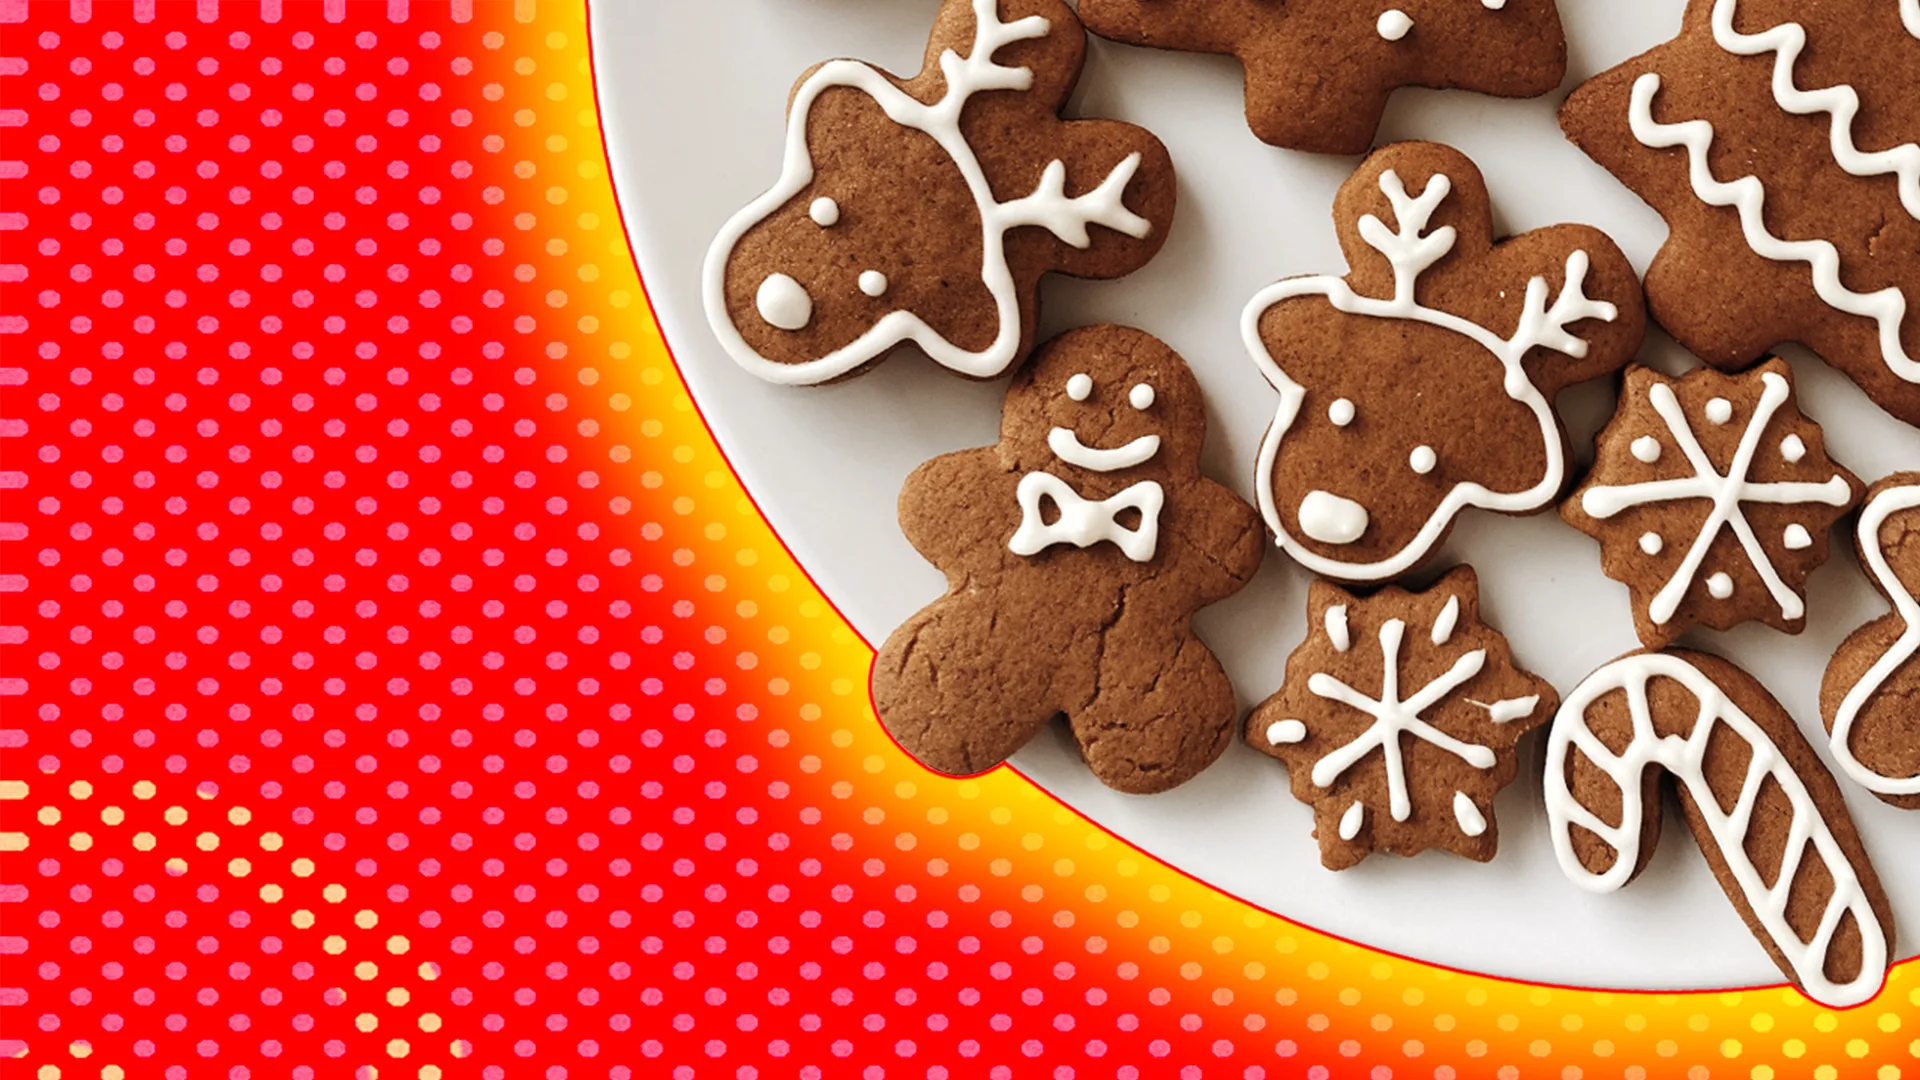 Gingerbread cookies on a white plate, with a yellow glow on a red background